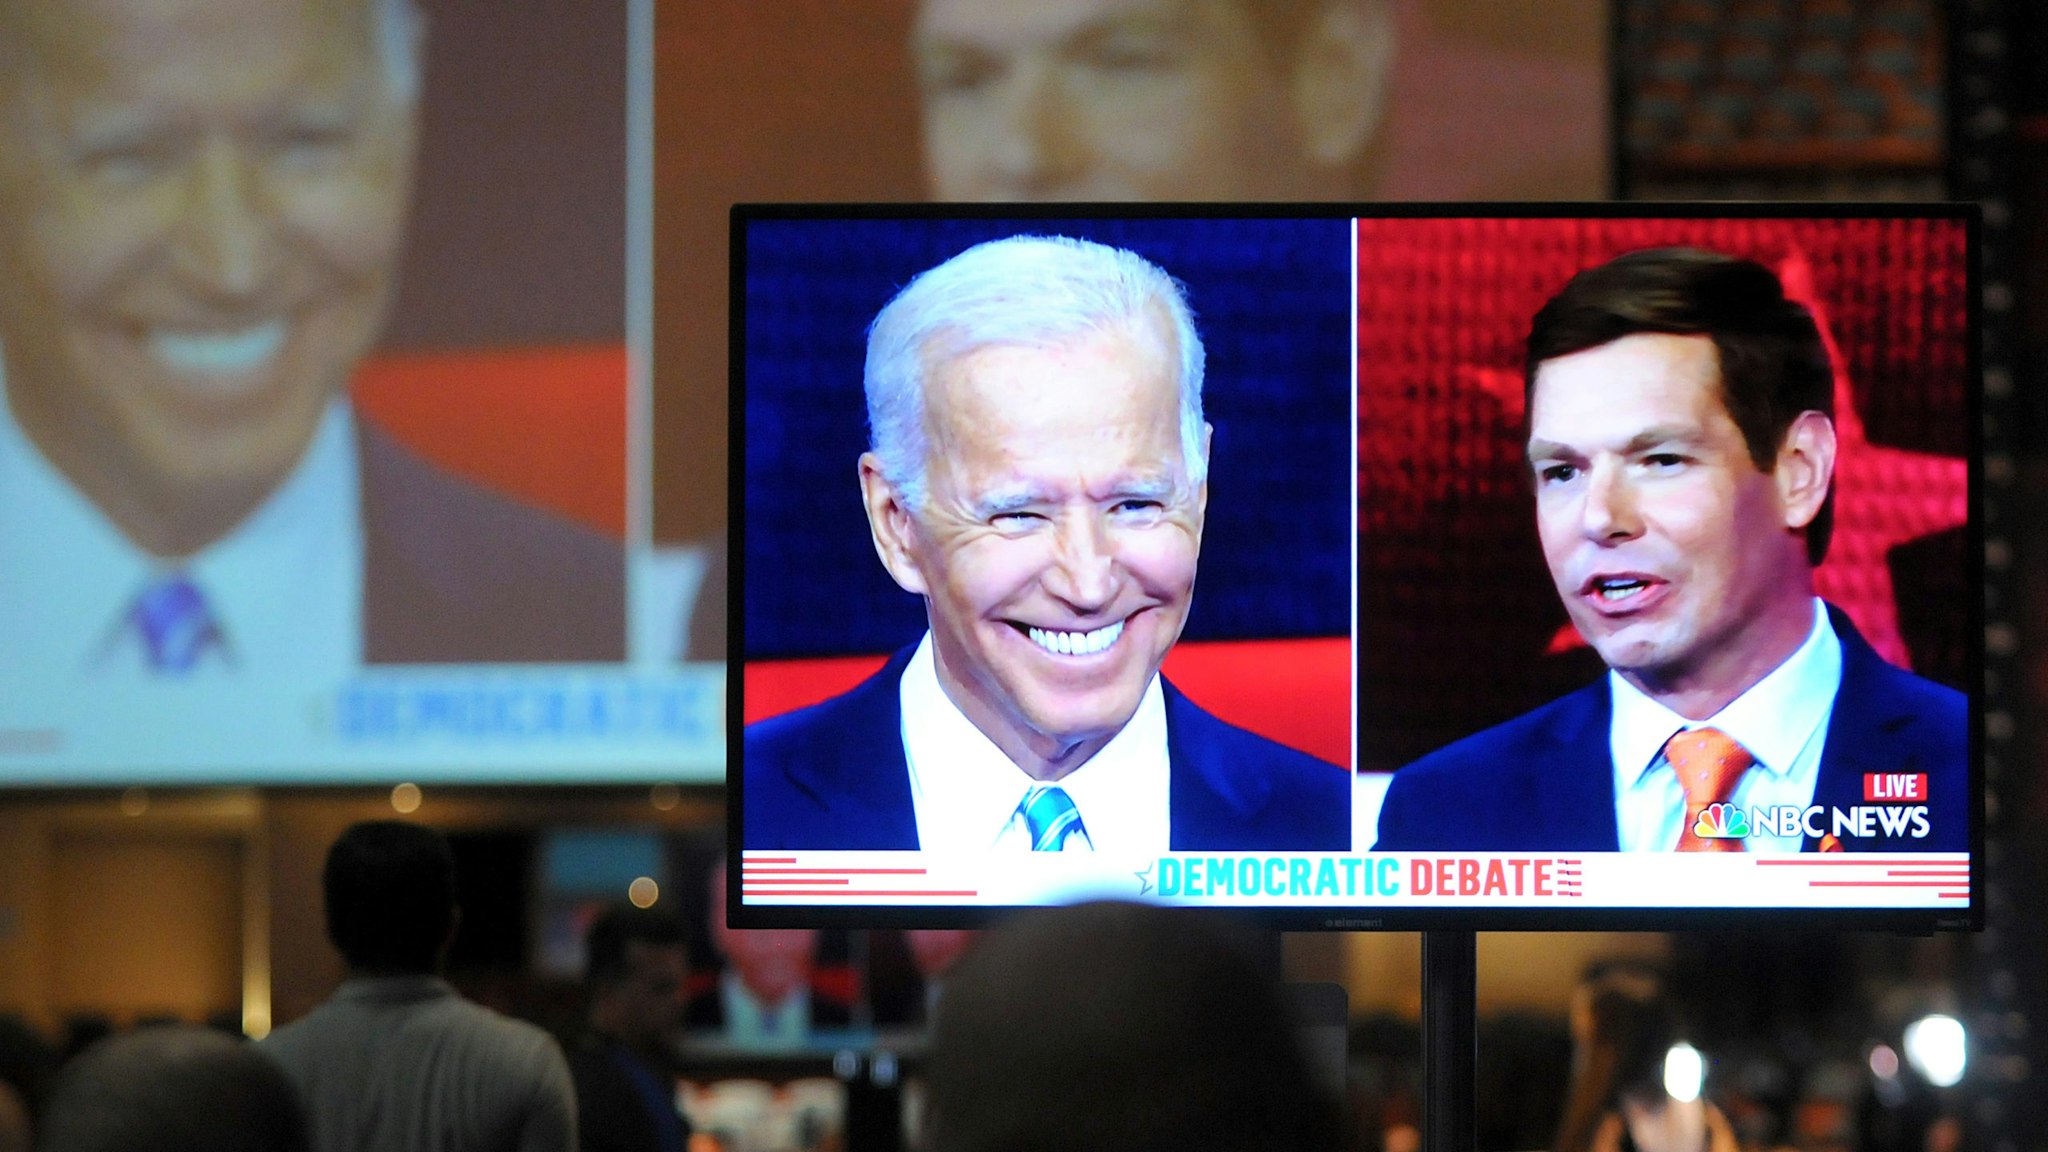 Democratic presidential hopeful Rep. Eric Swalwell of California is seen on a monitor in the spin room with former U.S. Vice President Joe Biden during night two of the first Democratic presidential primary debate for the 2020 election on June 27, 2019 at the Knight Concert Hall at the Adrienne Arsht Center for the Performing Arts in Miami, Florida.